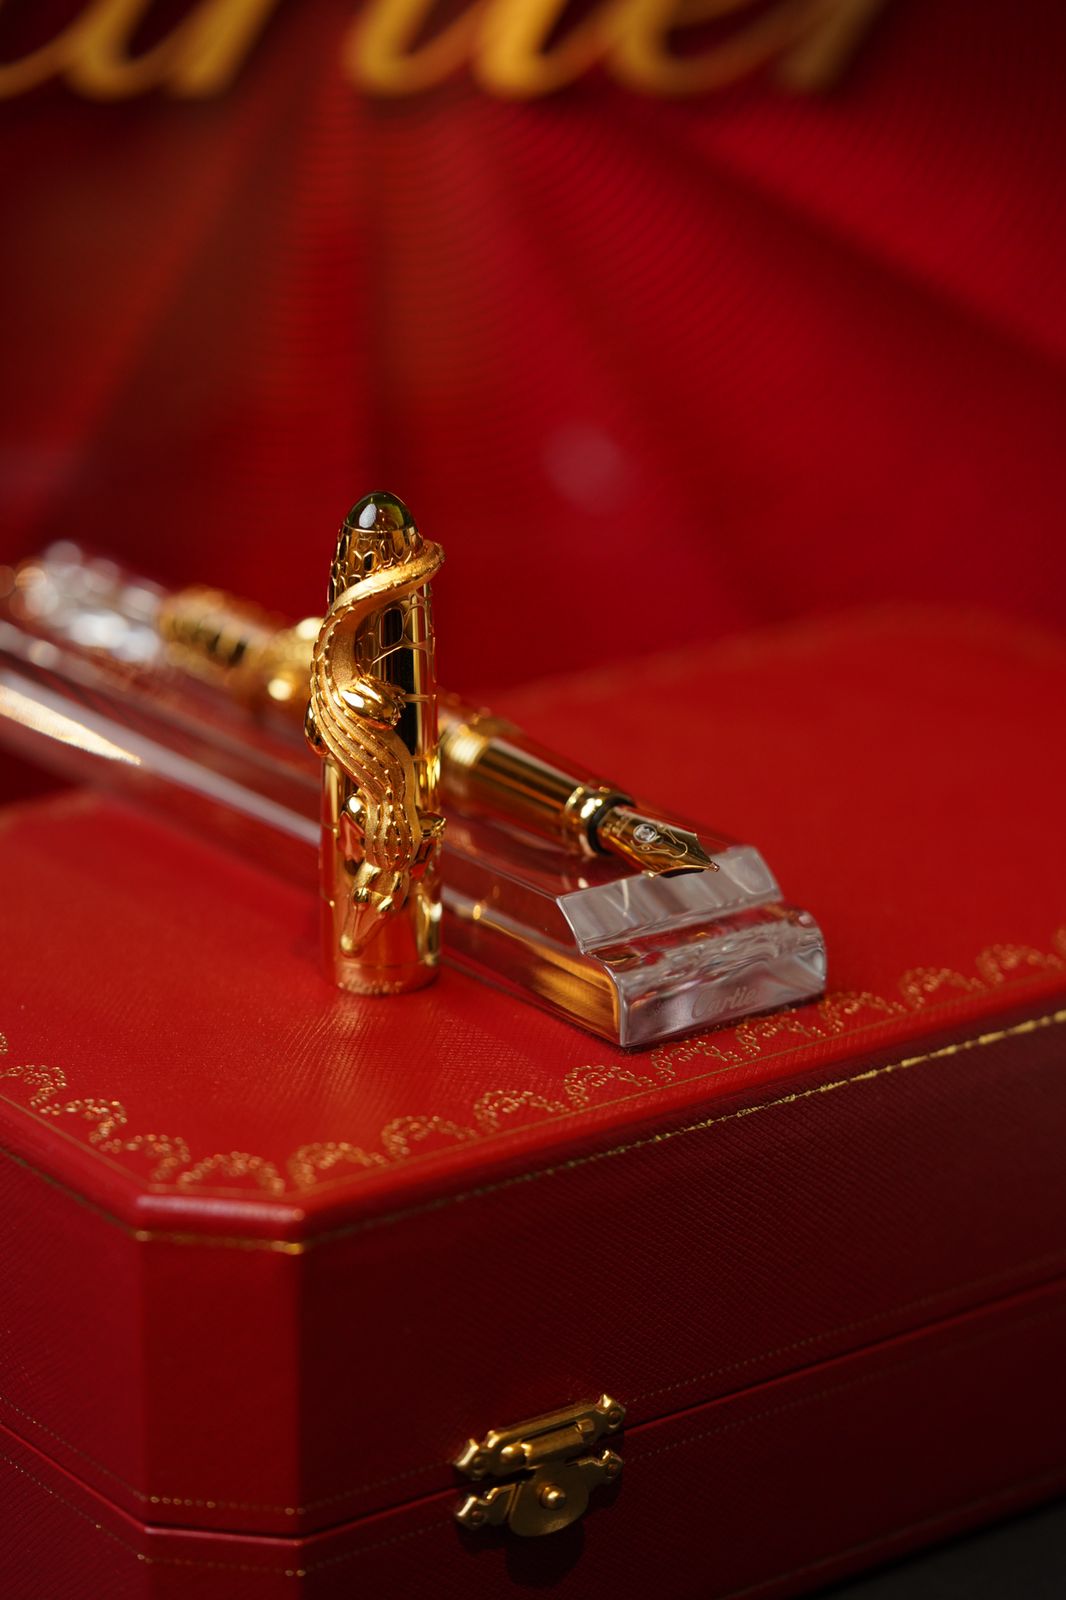 Cartier Limited Fountain Pen Plaque Crocodile Limited to 888 